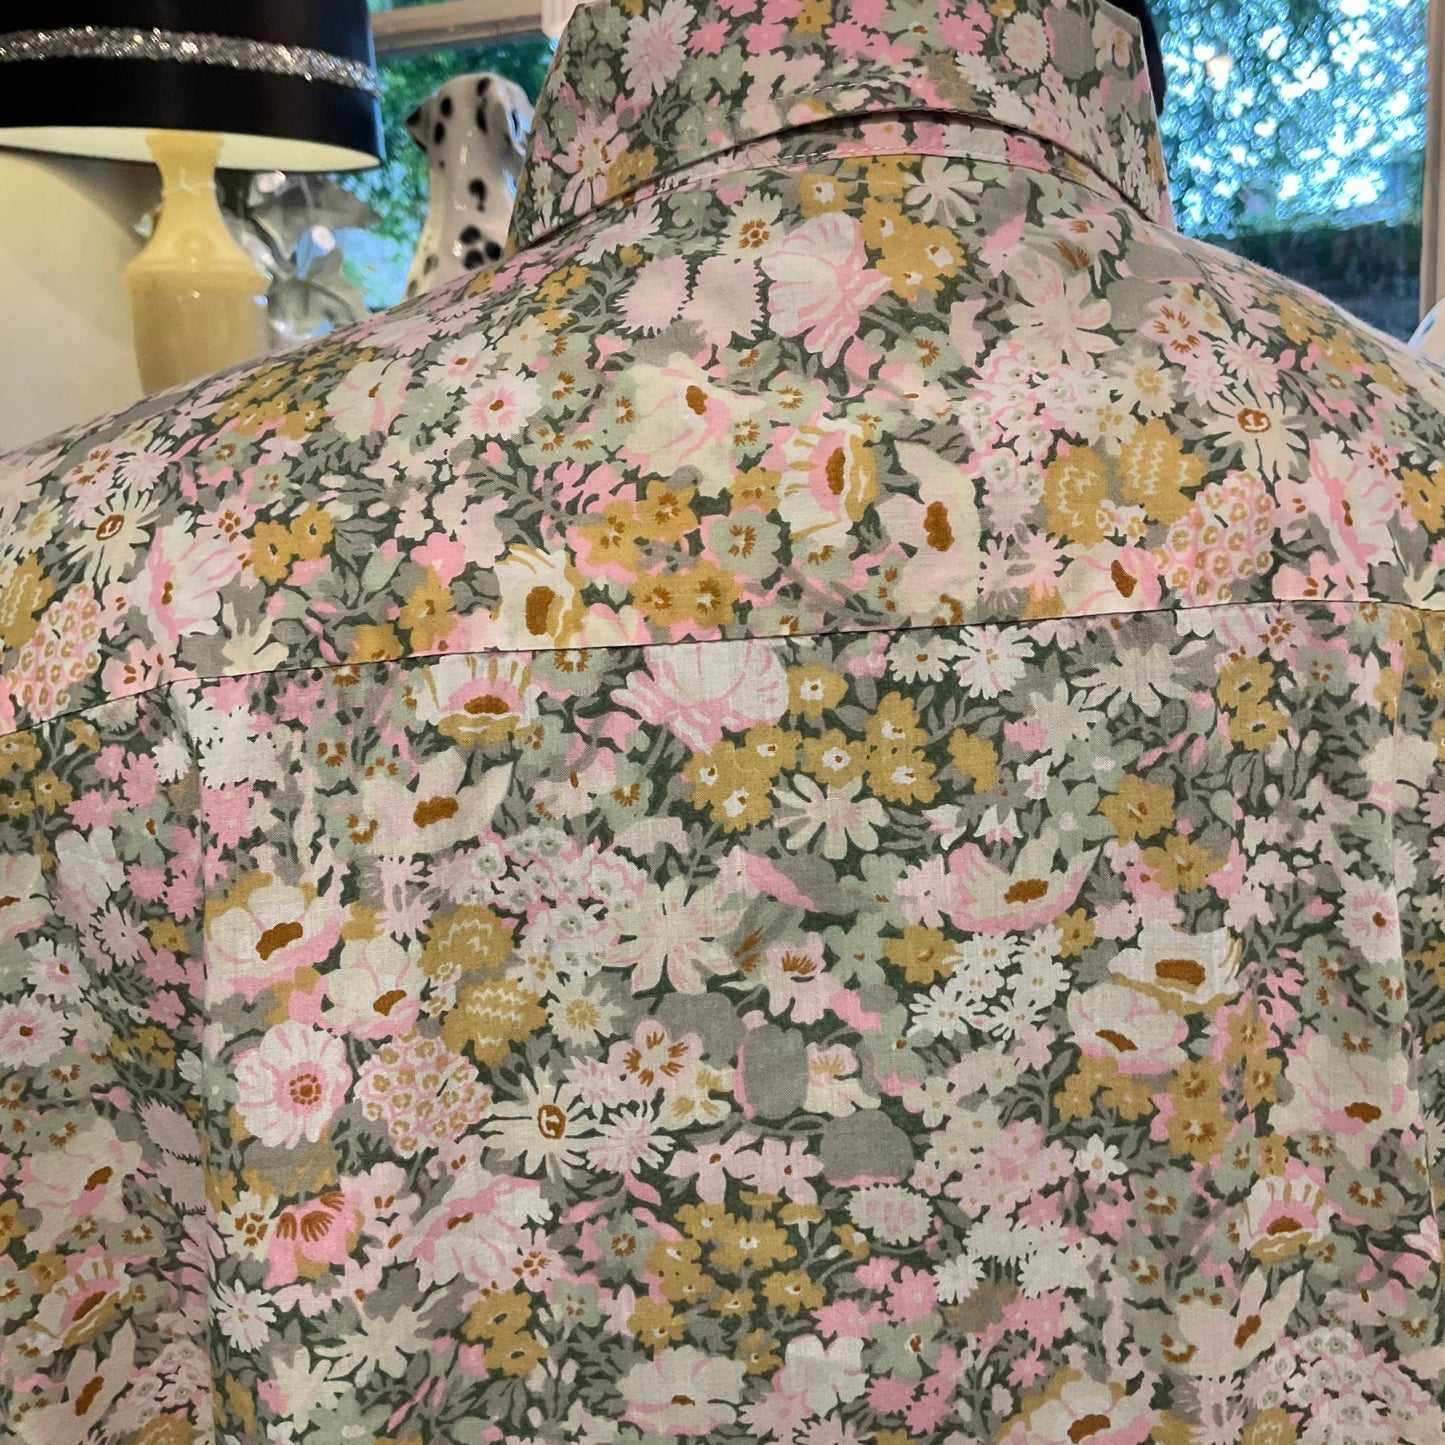 Vintage 1970/80s Liberty floral print shirt by “James Mead” , size 22/24